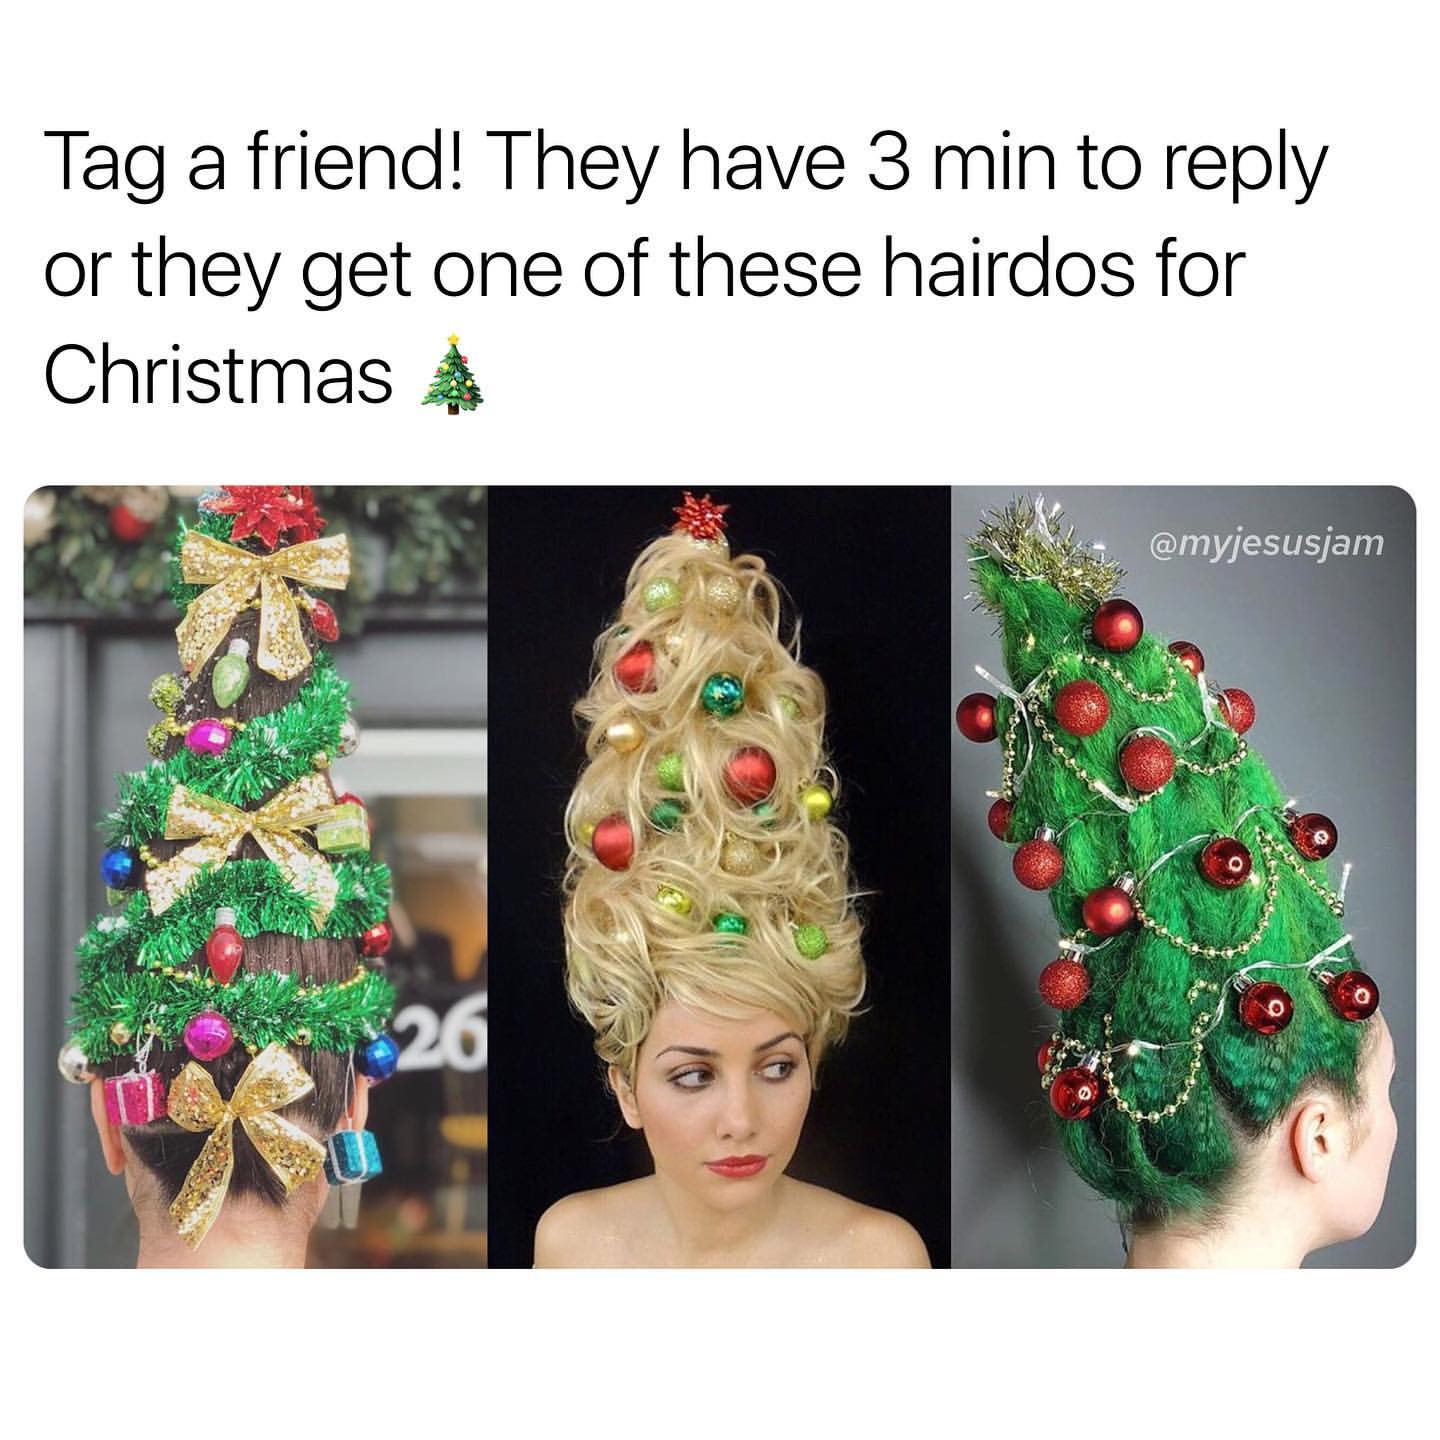 Tag a friend! They have 3 min to reply or they get one of these hairdos for Christmas.